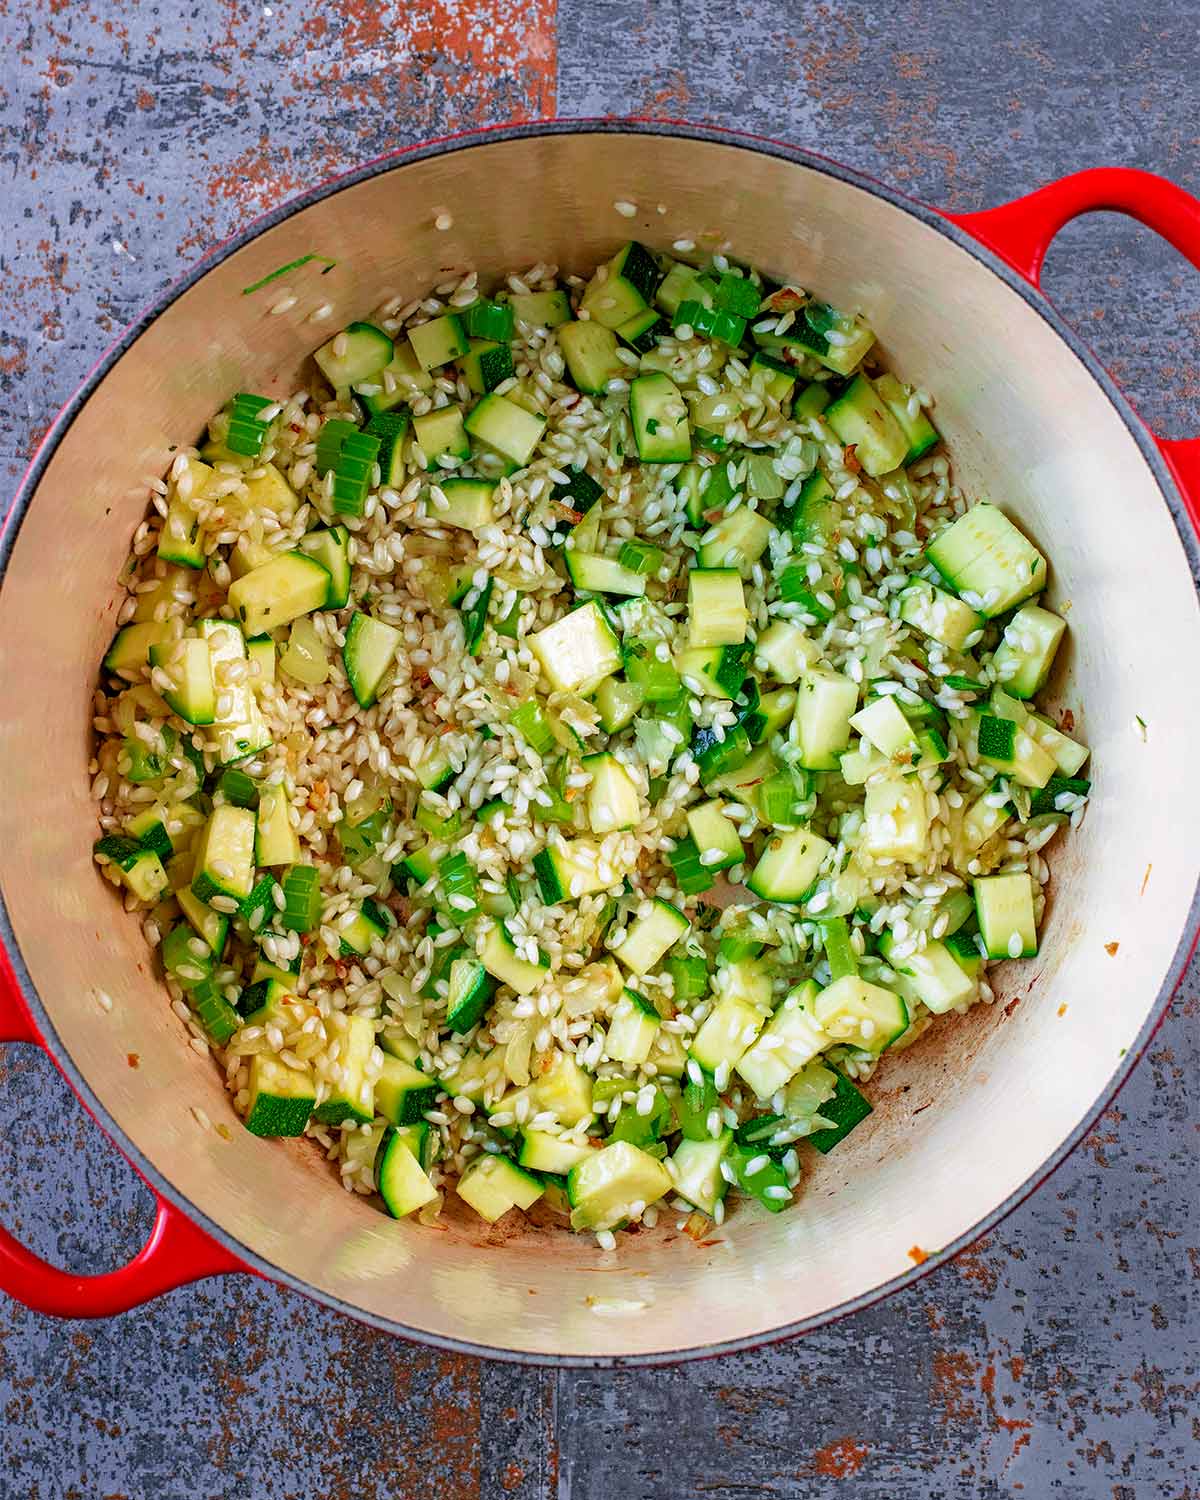 A large red pan with celery, shallots, courgette and risotto rice.